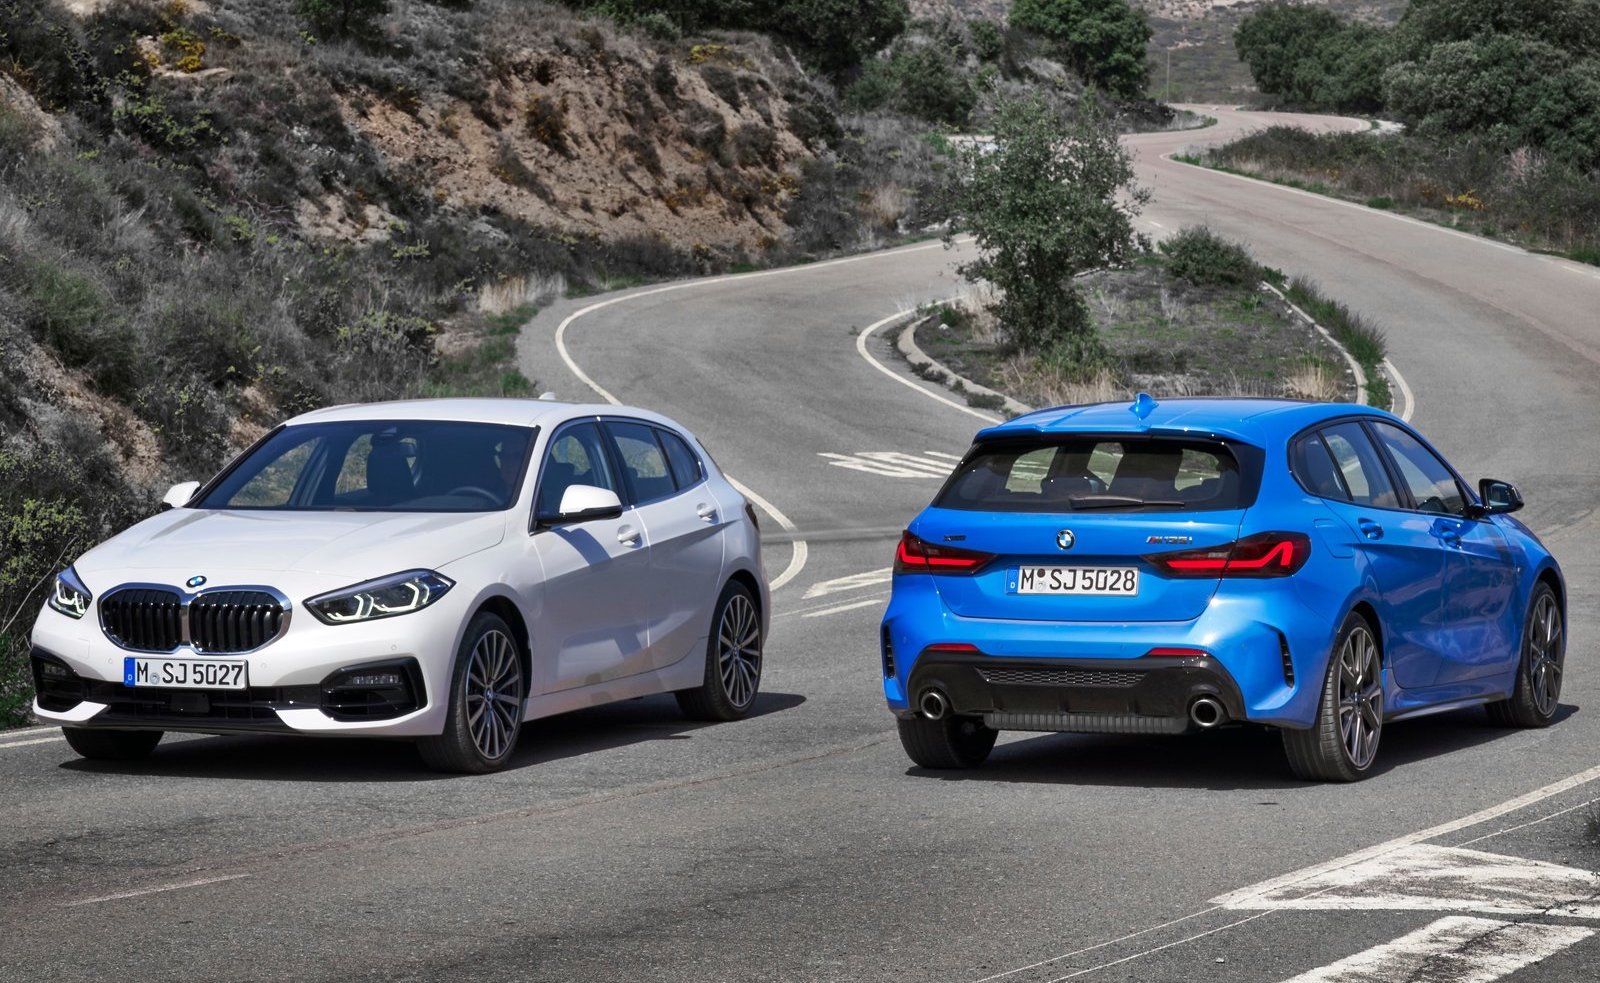 2020 Bmw 1 Series Revealed Topped By M135i Xdrive